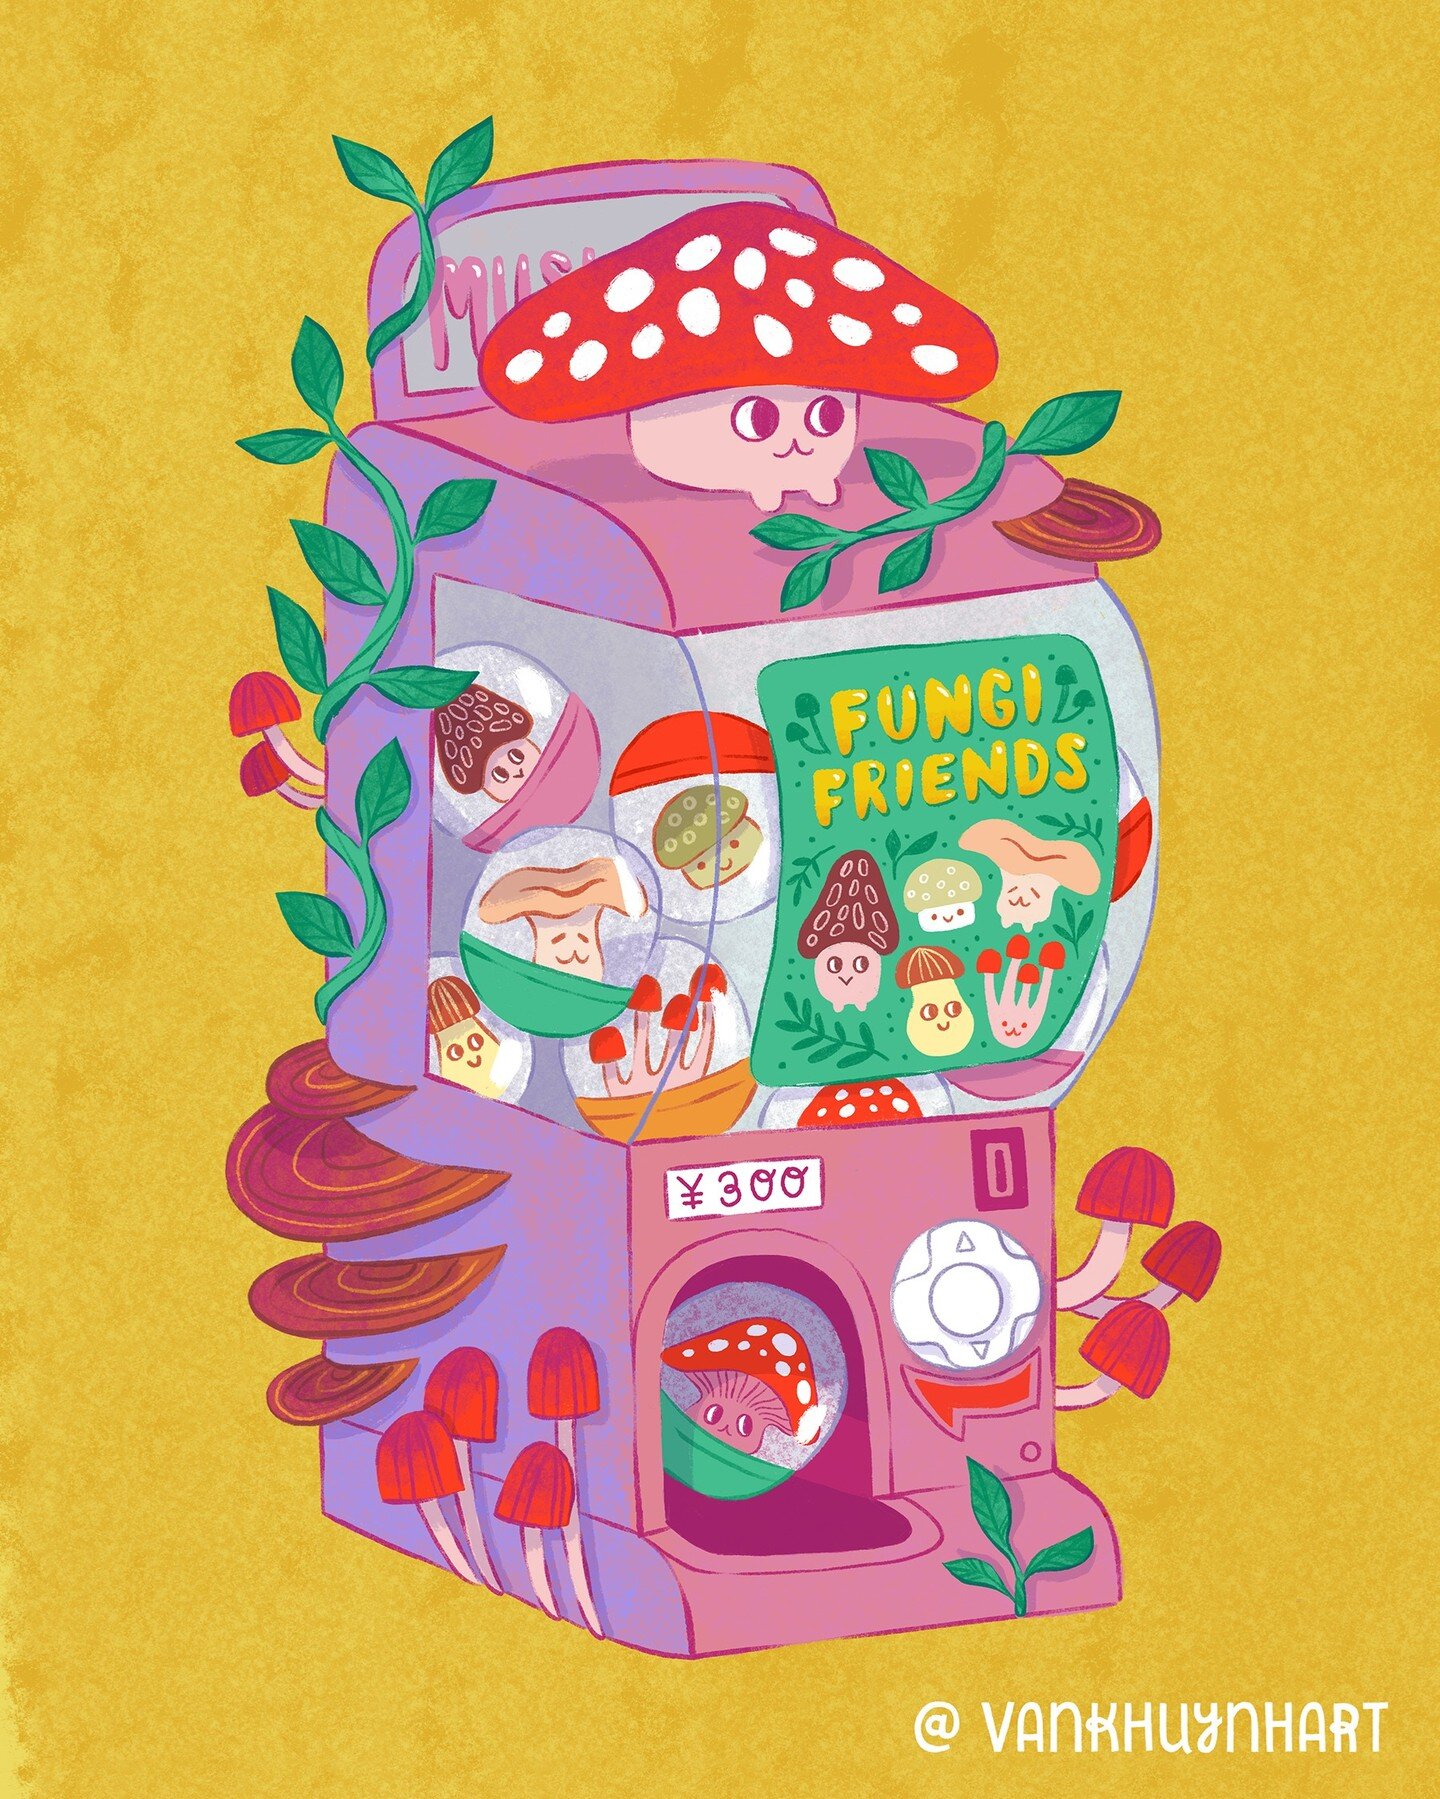 Happy Friday! Just wanted to share this fun illustration I did this week of a Mushroom themed gachapon machine. I might try to do a series of gachapon machines in different themes. Anybody else in love with gachapon? They've been popping up alot at m